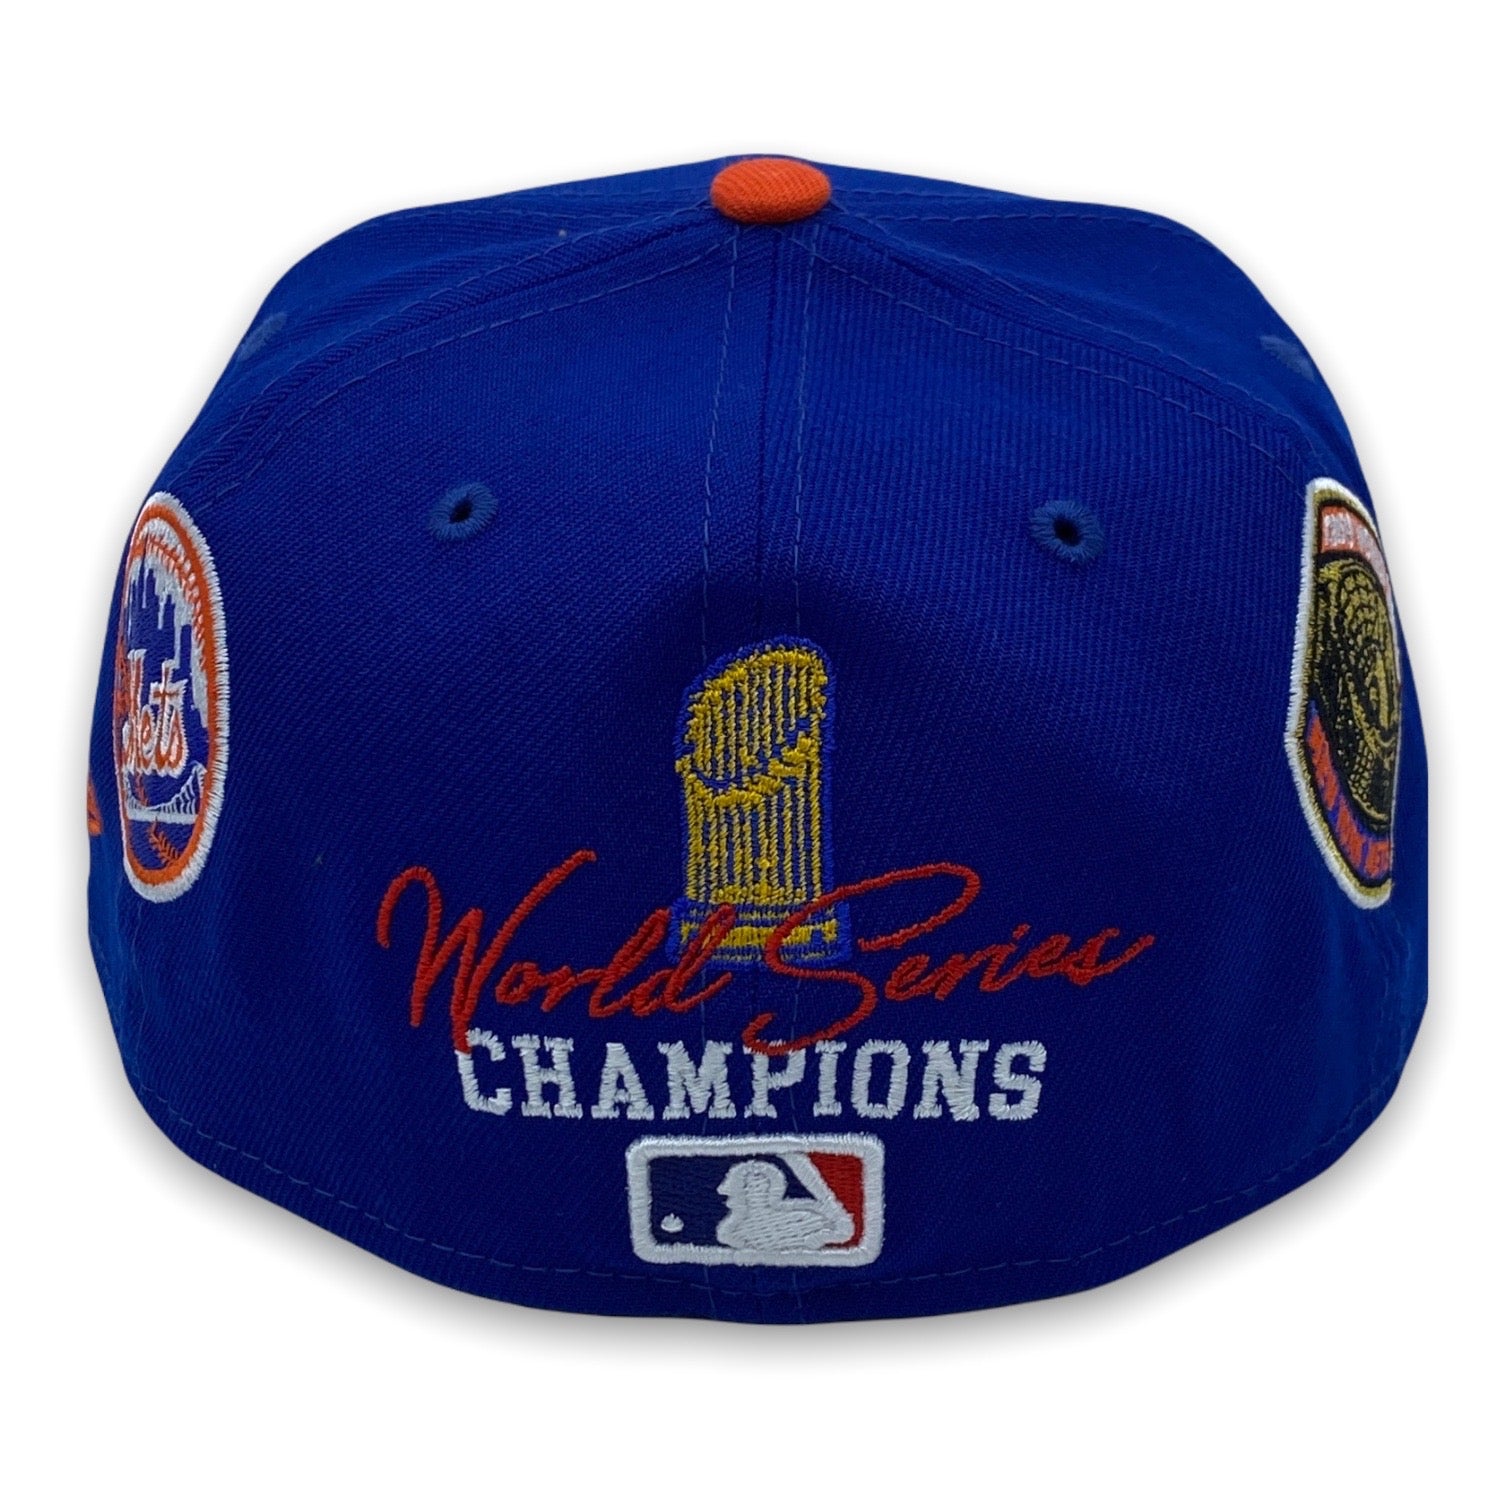 Royal Blue New York Mets 2x World Series Champions Ring New Era 59FIFTY Fitted 7 1/8